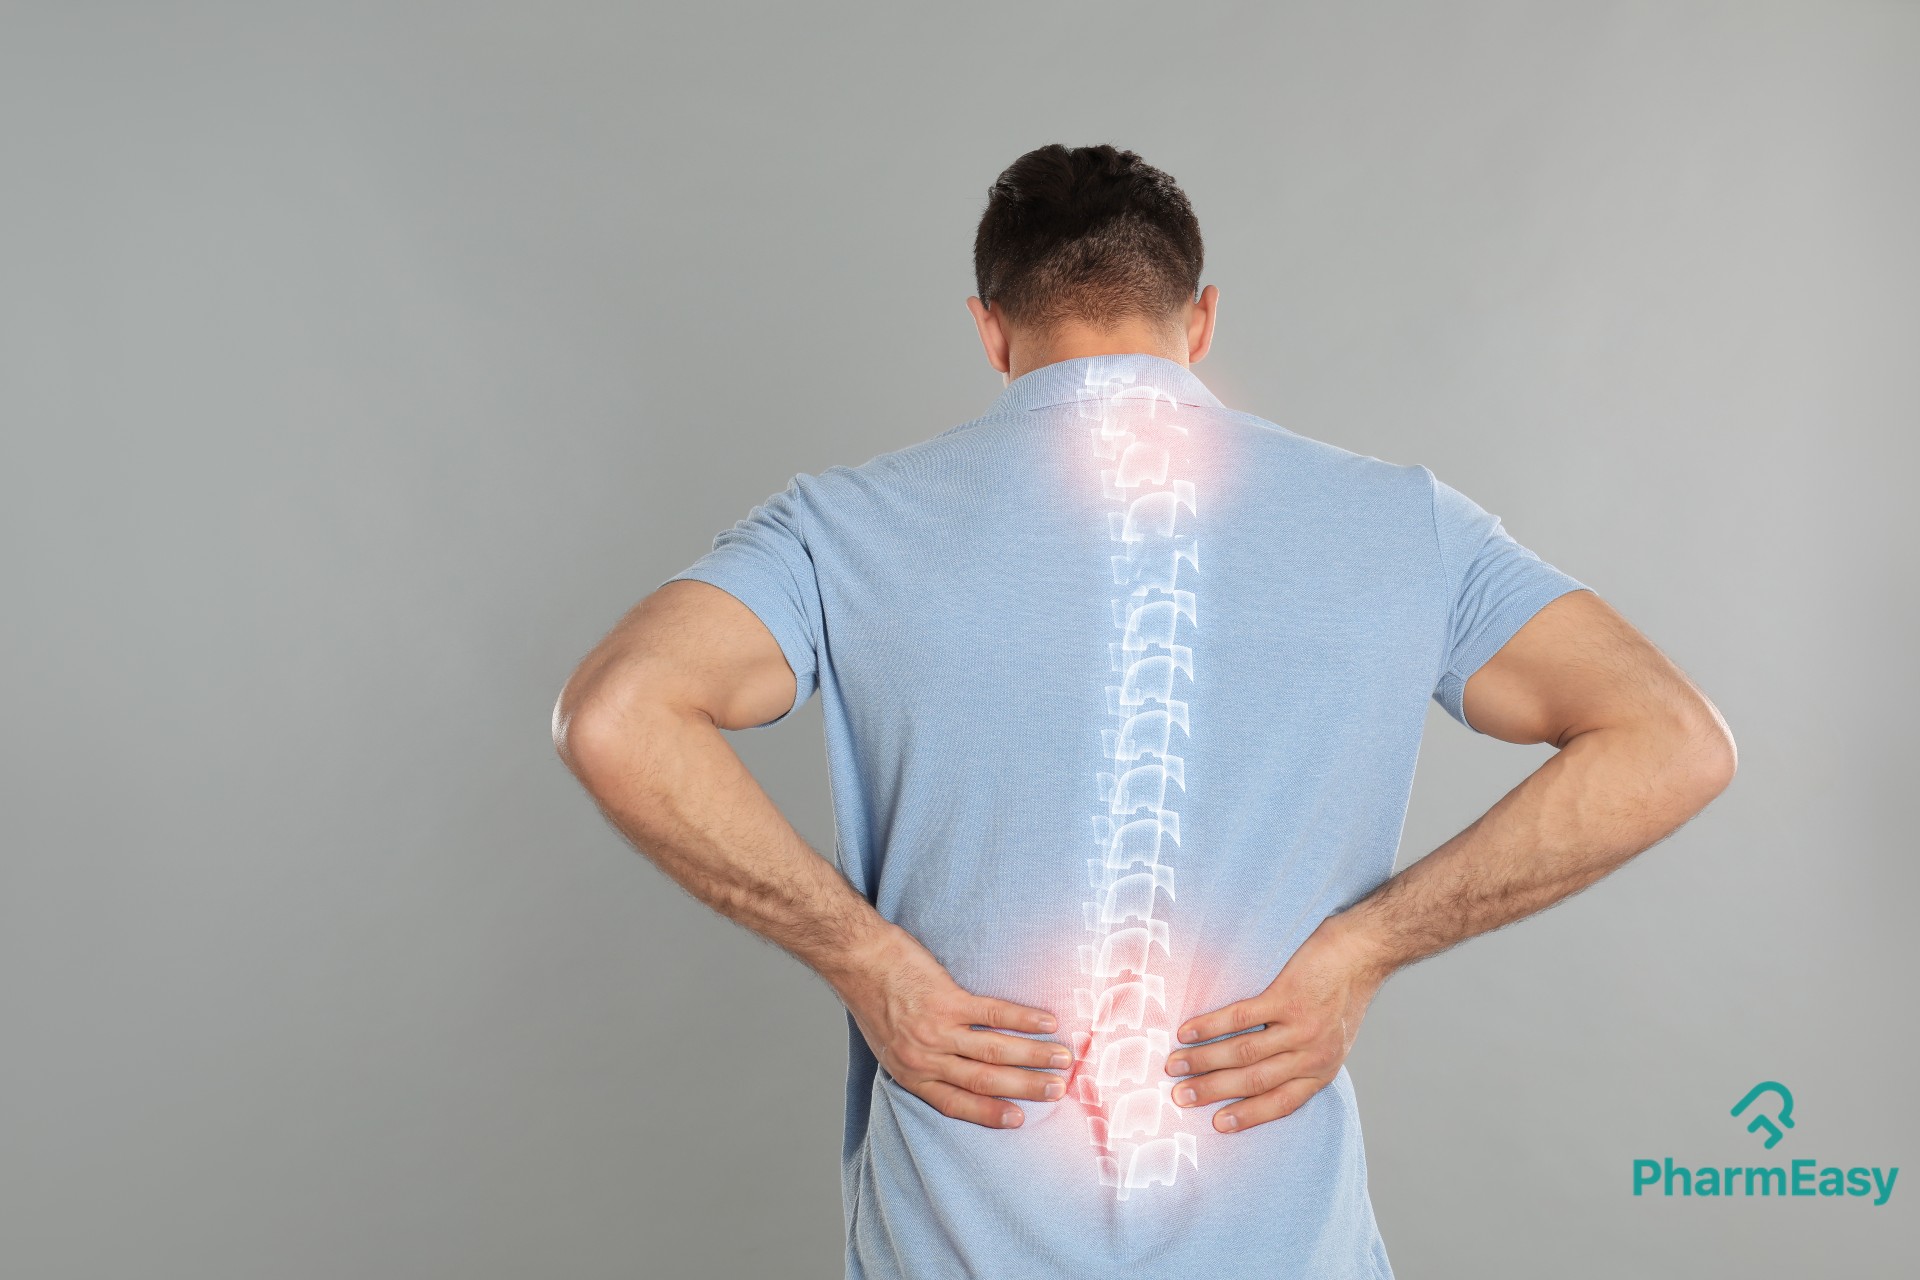 The Powerful Lifestyle Benefits of Good Posture - UPRIGHT Posture